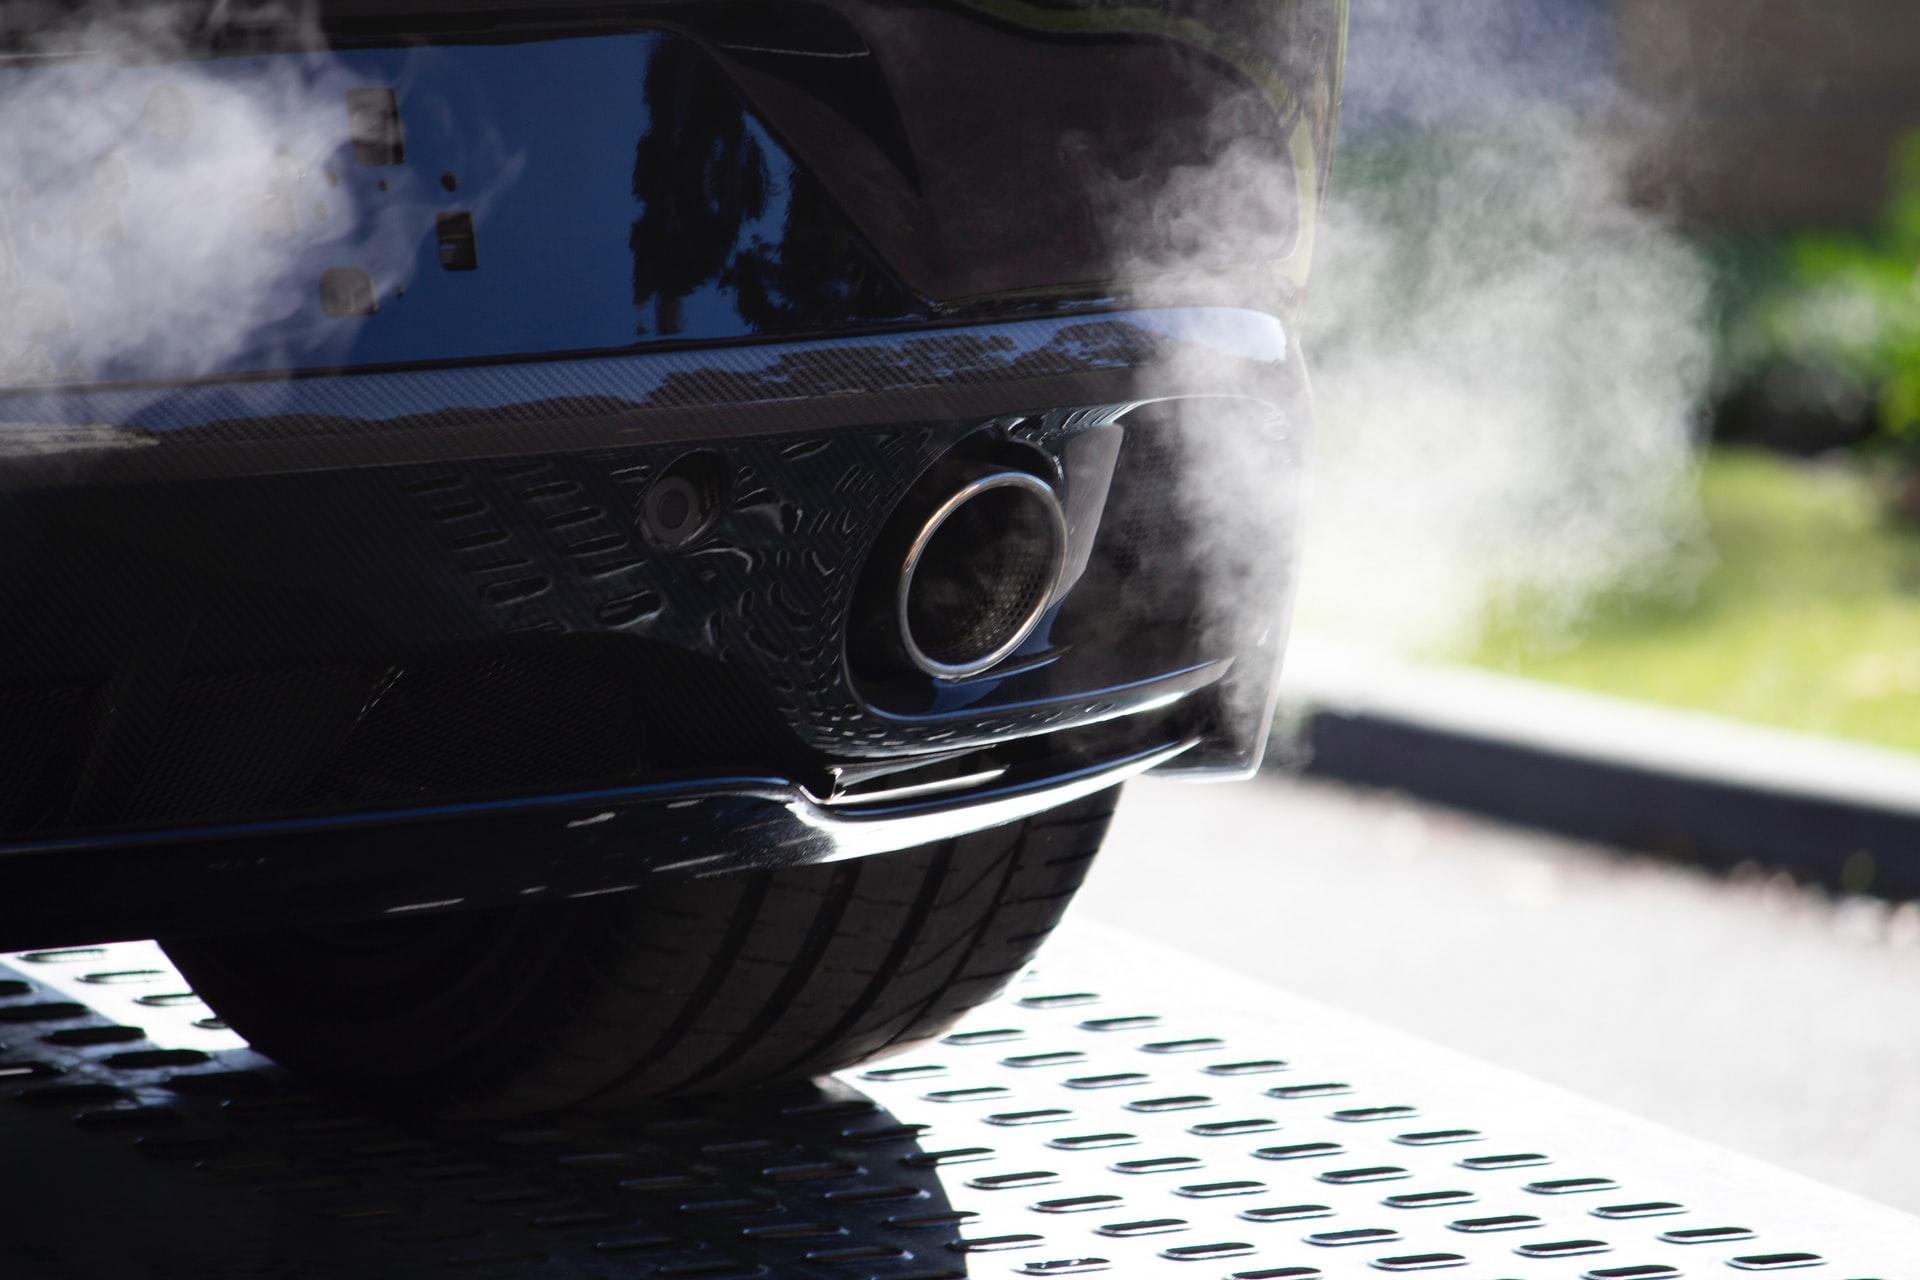 New York has introduced a new vehicle fine that targets loud exhaust pipes.